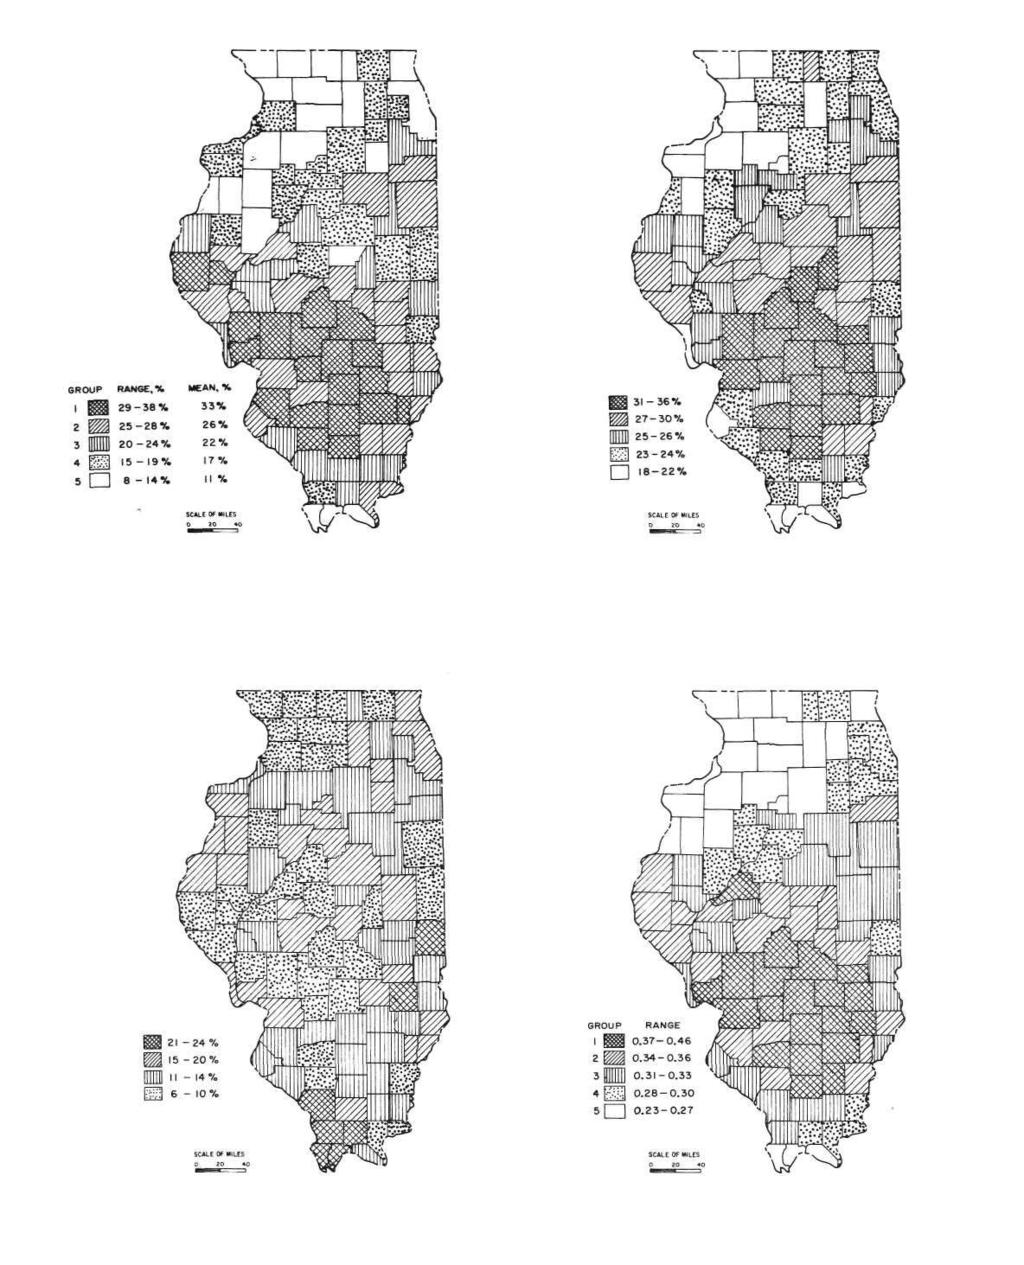 FIG. 2 VARIABILITY OF CORN YIELDS EXPLAINED BY WEATHER (SOIL) EXPRESSED AS PERCENT OF COUNTY MEAN YIELDS FIG.